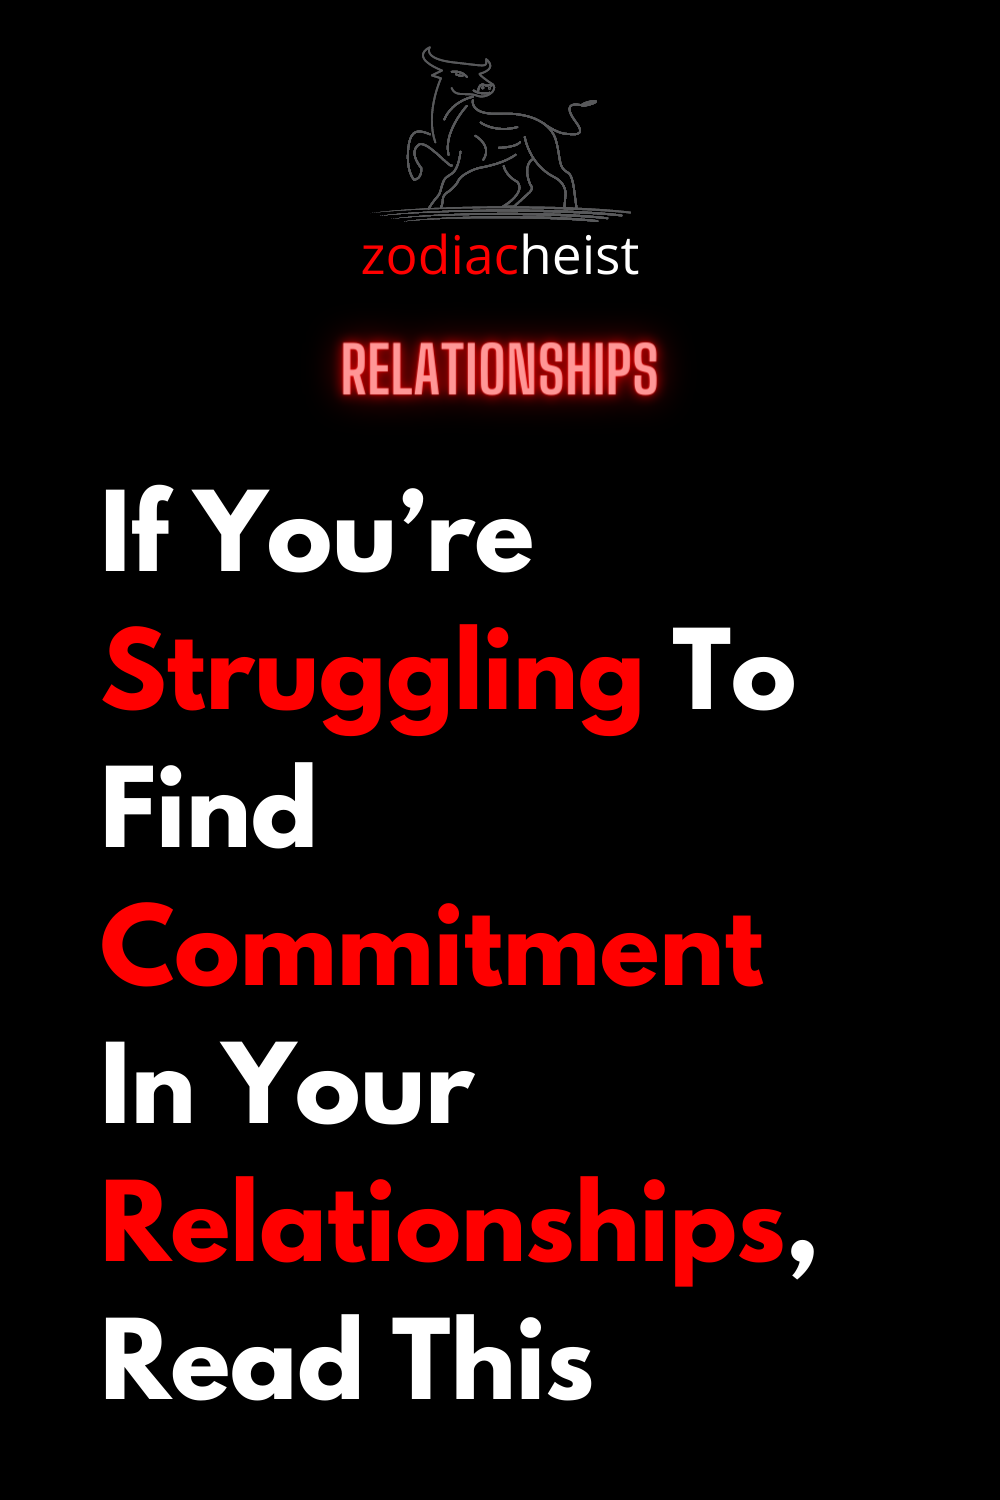 If You’re Struggling To Find Commitment In Your Relationships, Read This